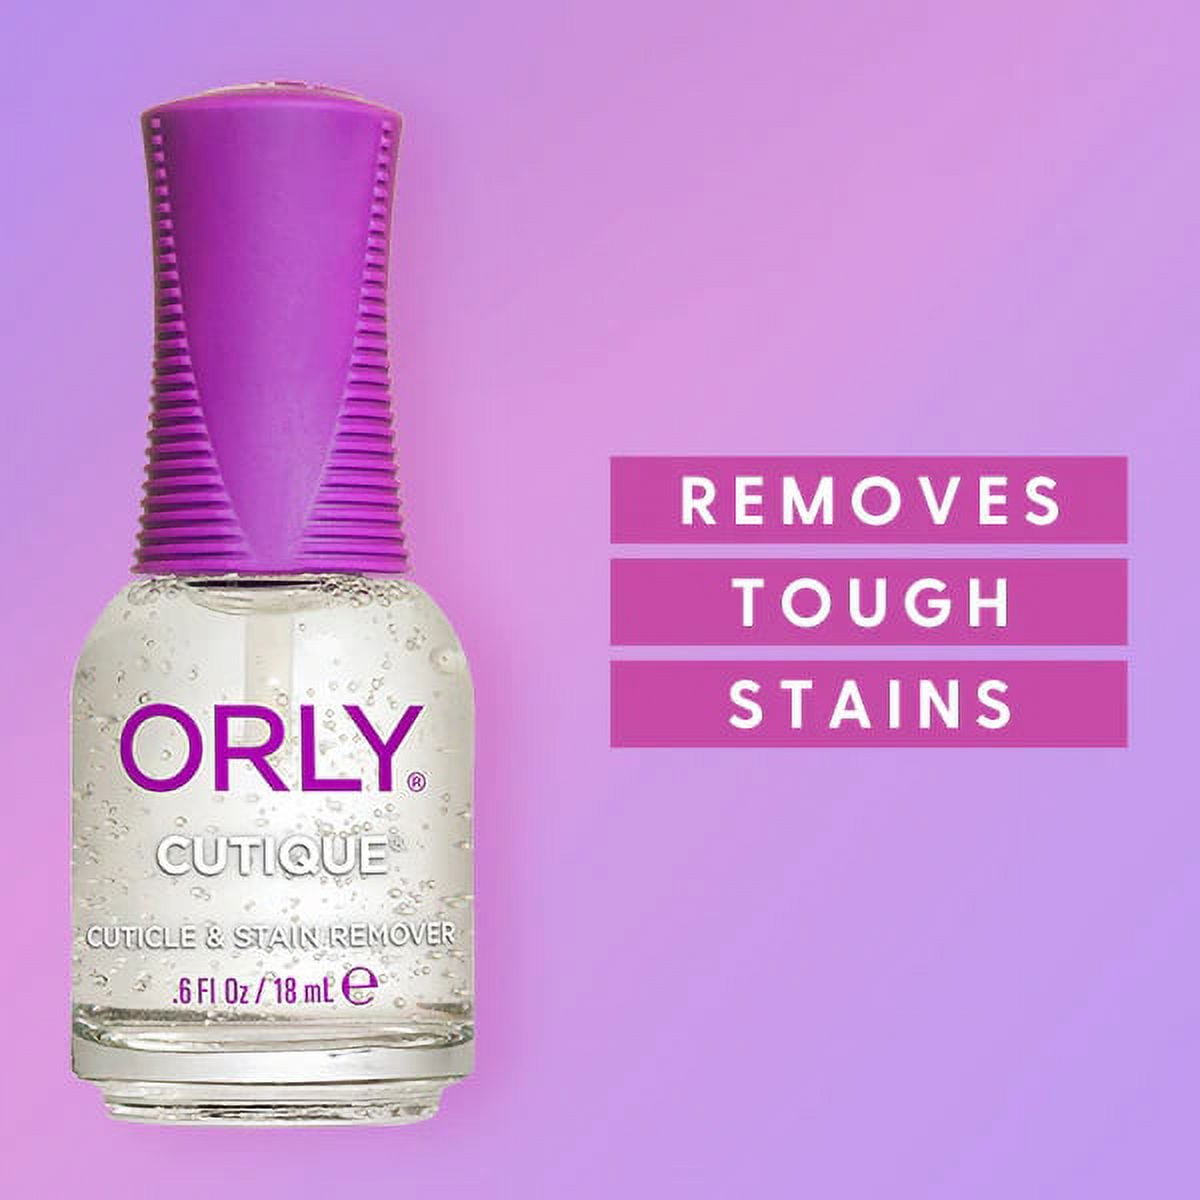 DIY: How To Remove Stains From Your Nails | MissJenFABULOUS - YouTube